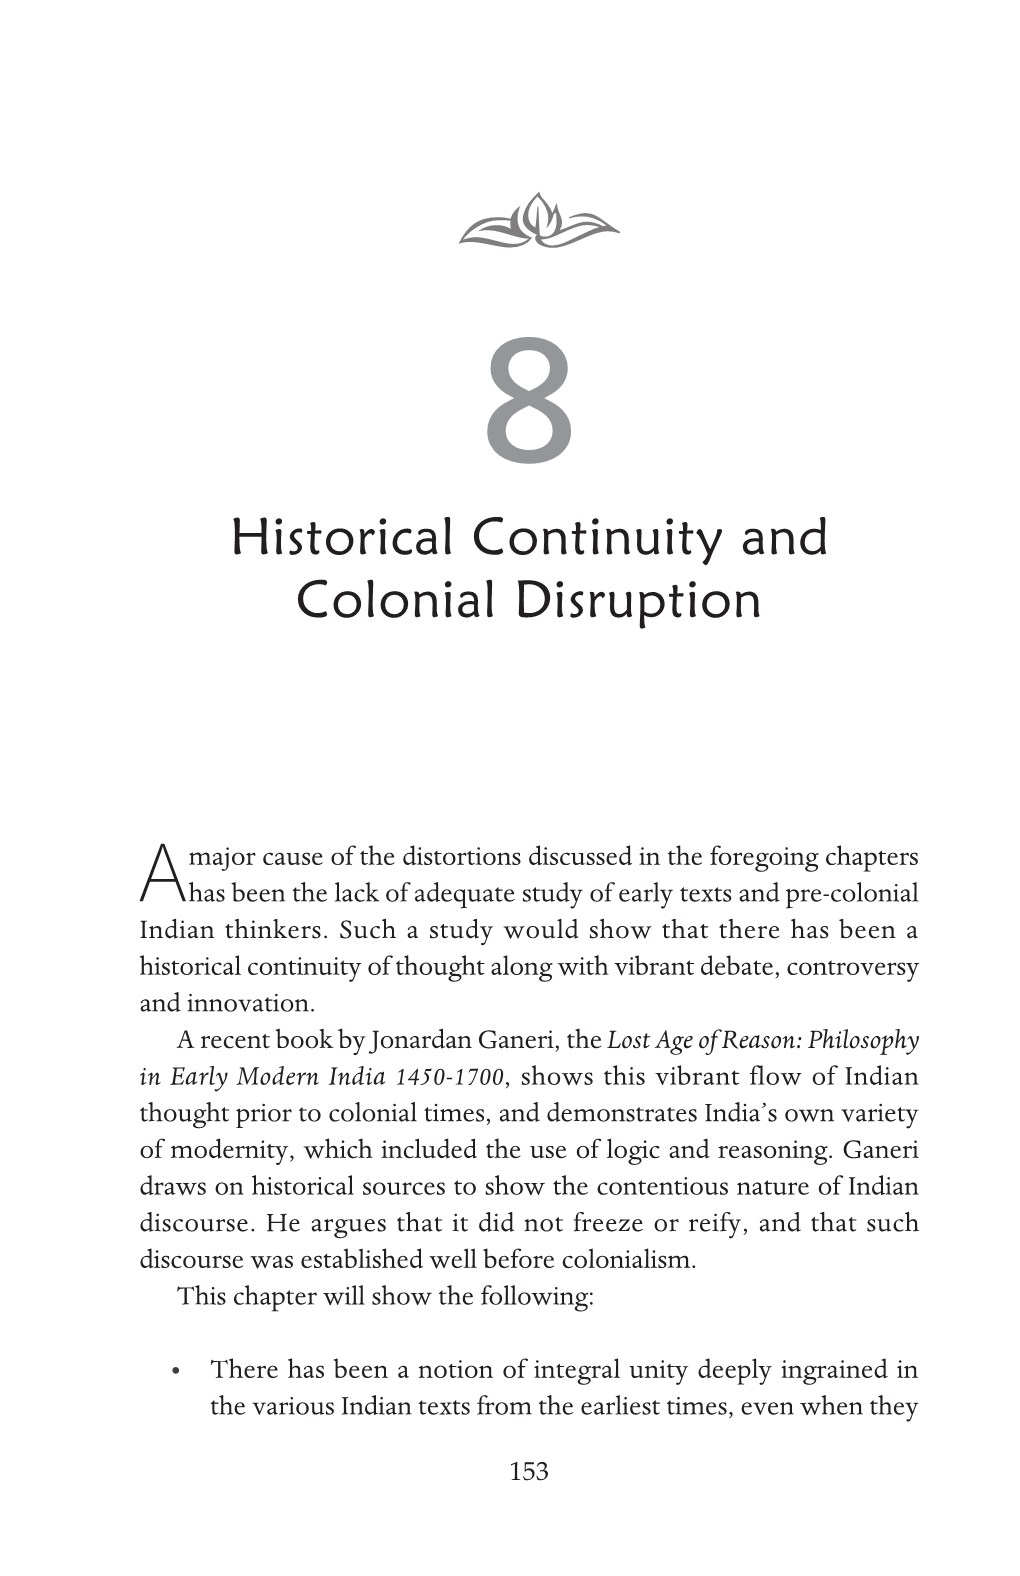 Historical Continuity and Colonial Disruption